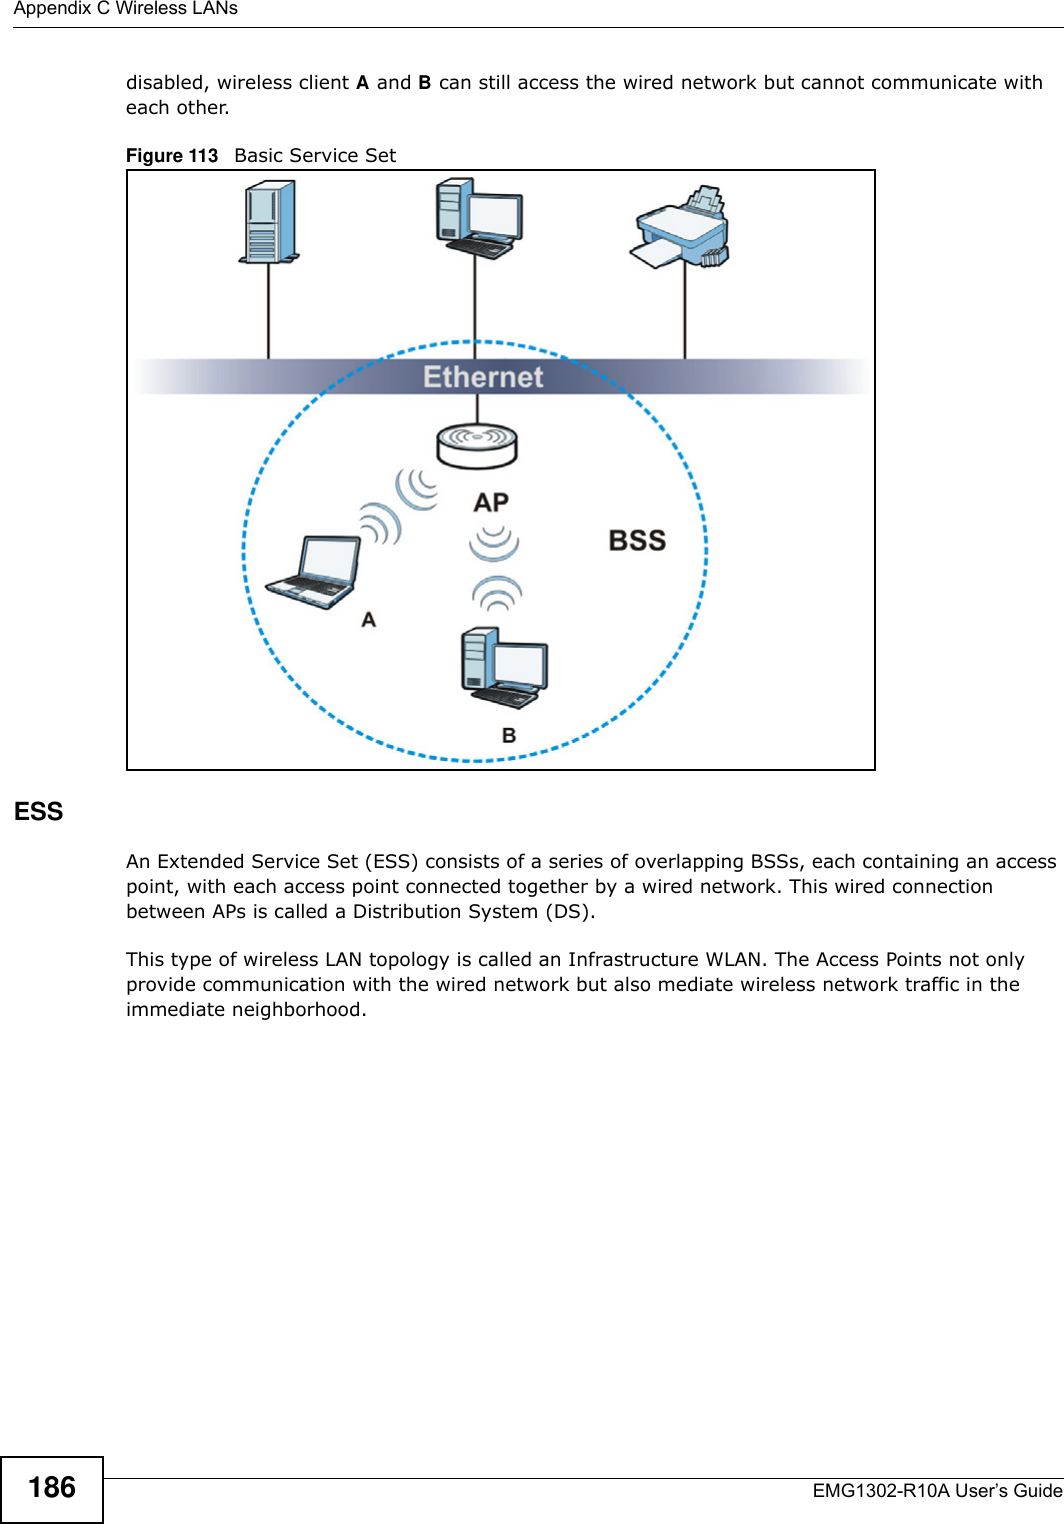 Appendix C Wireless LANsEMG1302-R10A User’s Guide186disabled, wireless client A and B can still access the wired network but cannot communicate with each other.Figure 113   Basic Service SetESSAn Extended Service Set (ESS) consists of a series of overlapping BSSs, each containing an access point, with each access point connected together by a wired network. This wired connection between APs is called a Distribution System (DS).This type of wireless LAN topology is called an Infrastructure WLAN. The Access Points not only provide communication with the wired network but also mediate wireless network traffic in the immediate neighborhood. 